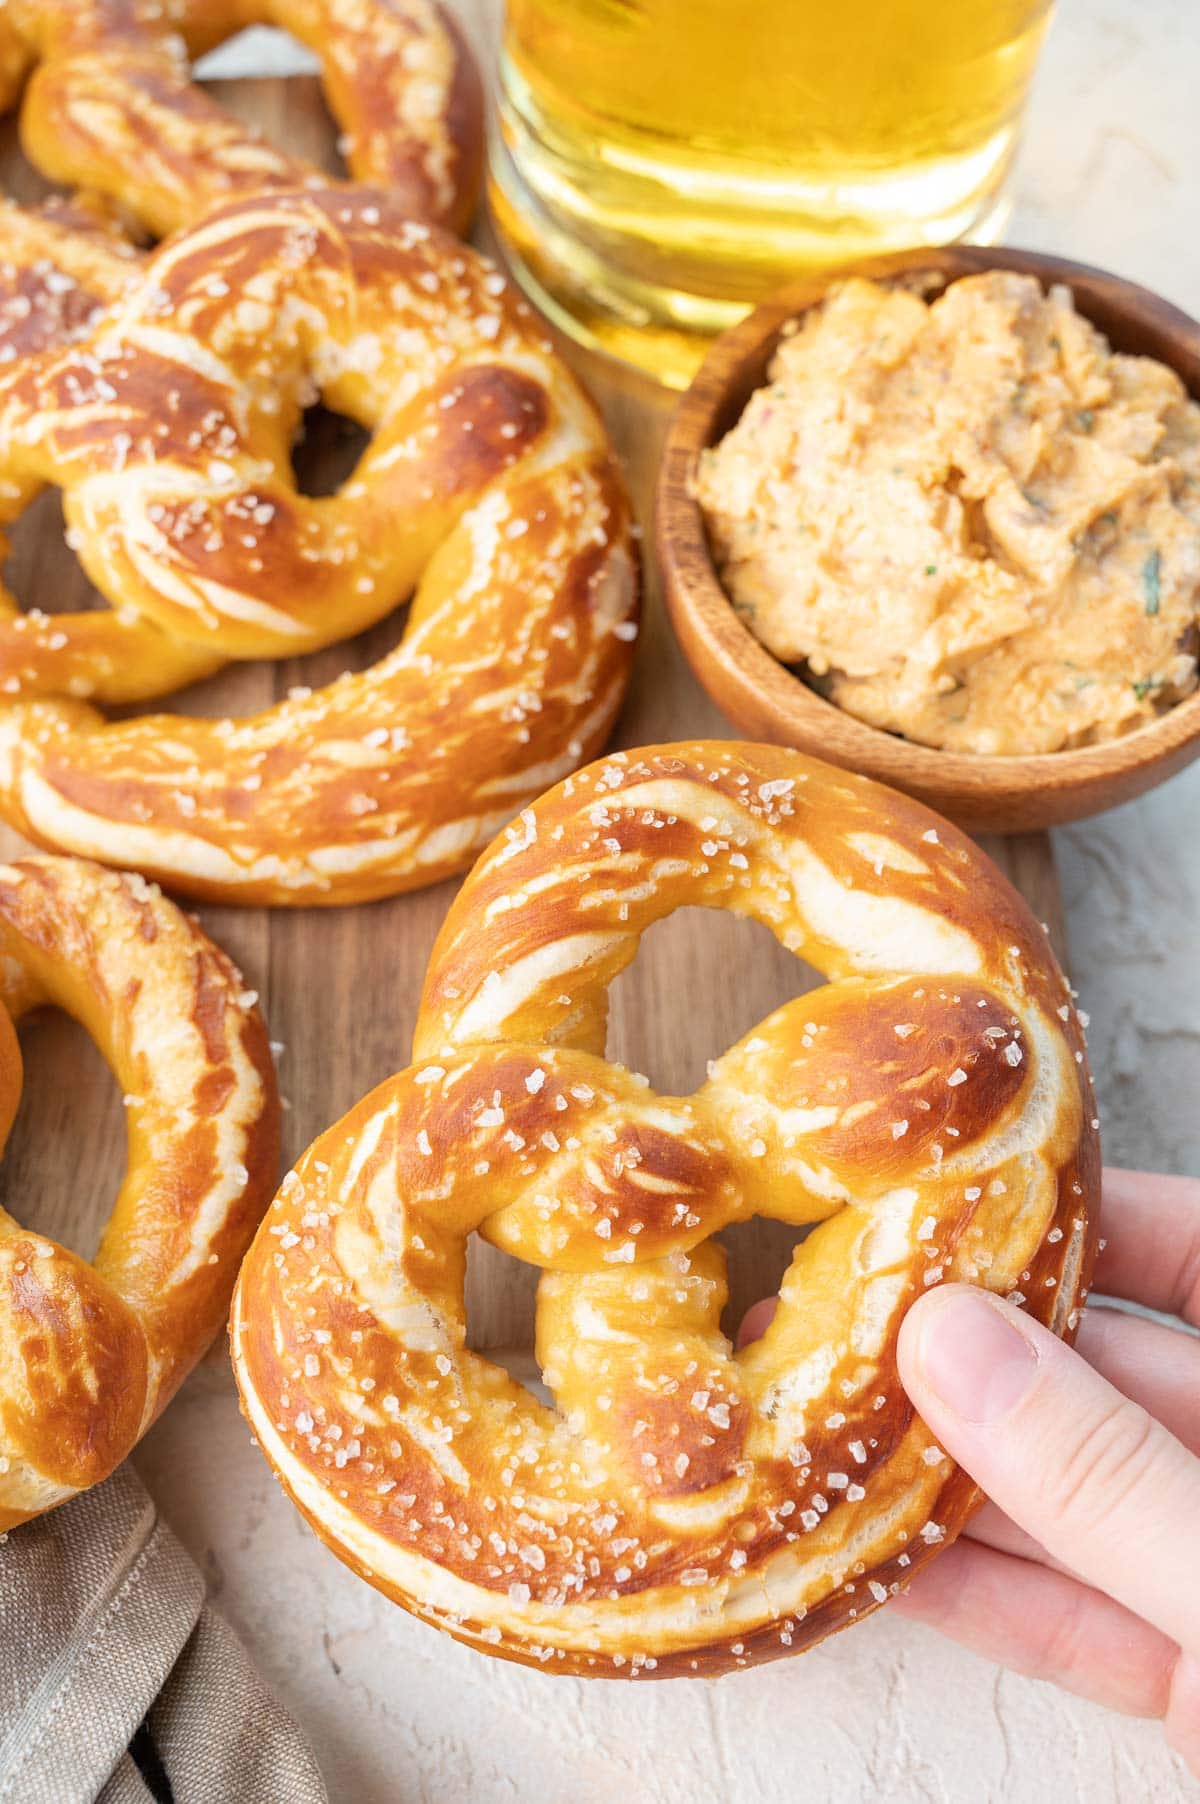 Soft pretzels on a wooden board. Beer and cheese dip on the side. One pretzel is held in a hand.